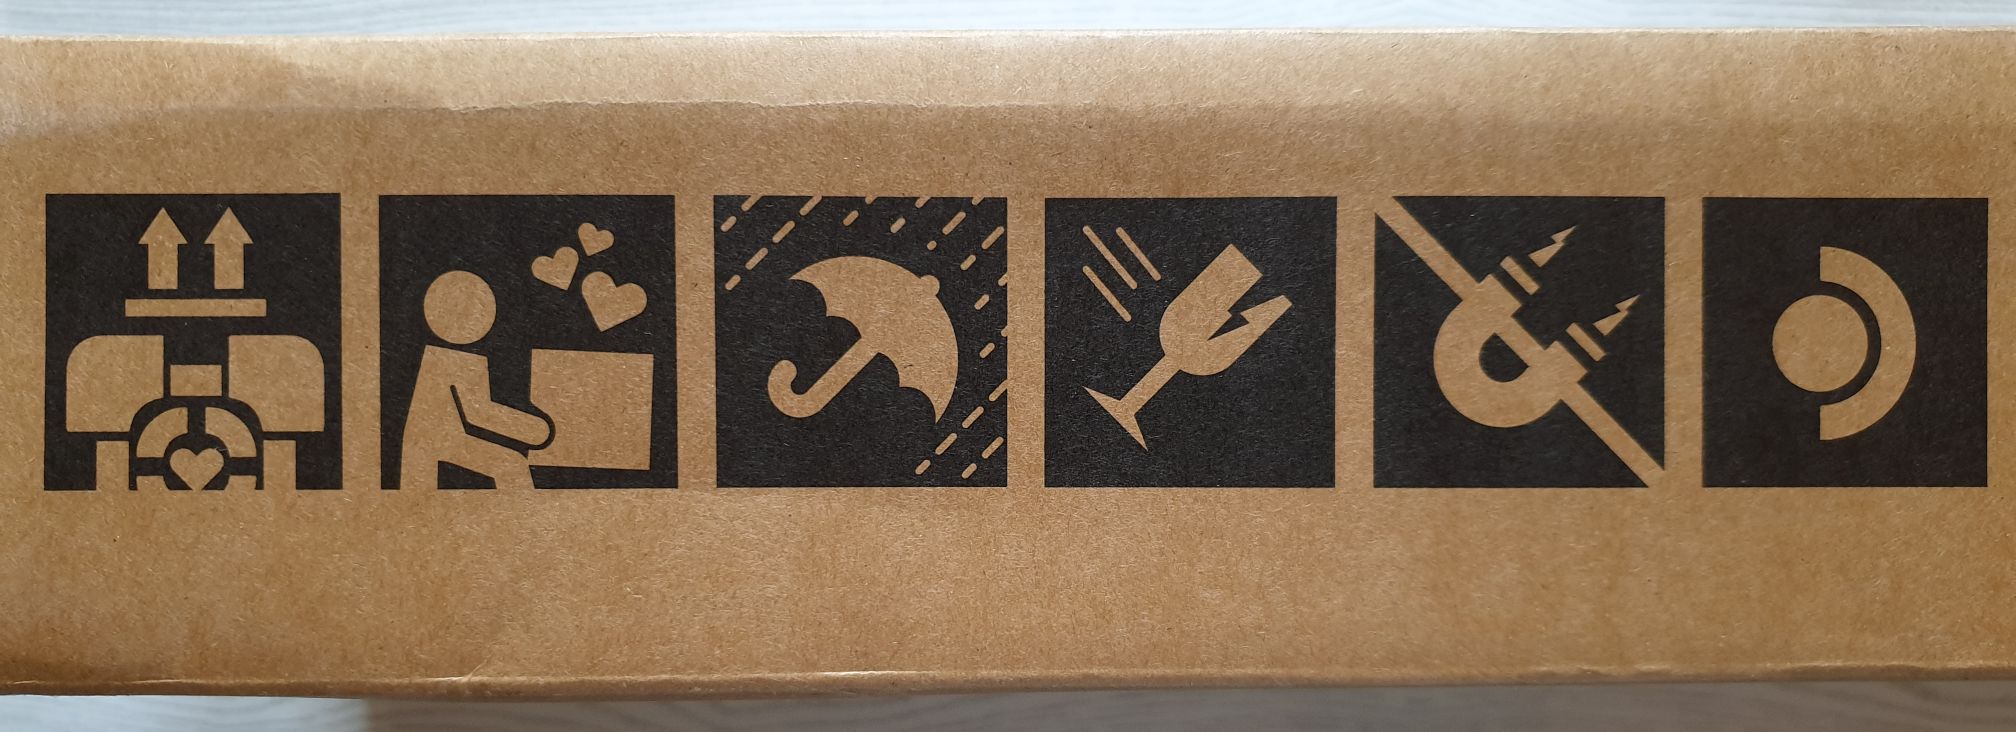 Portal icons on the side of the box